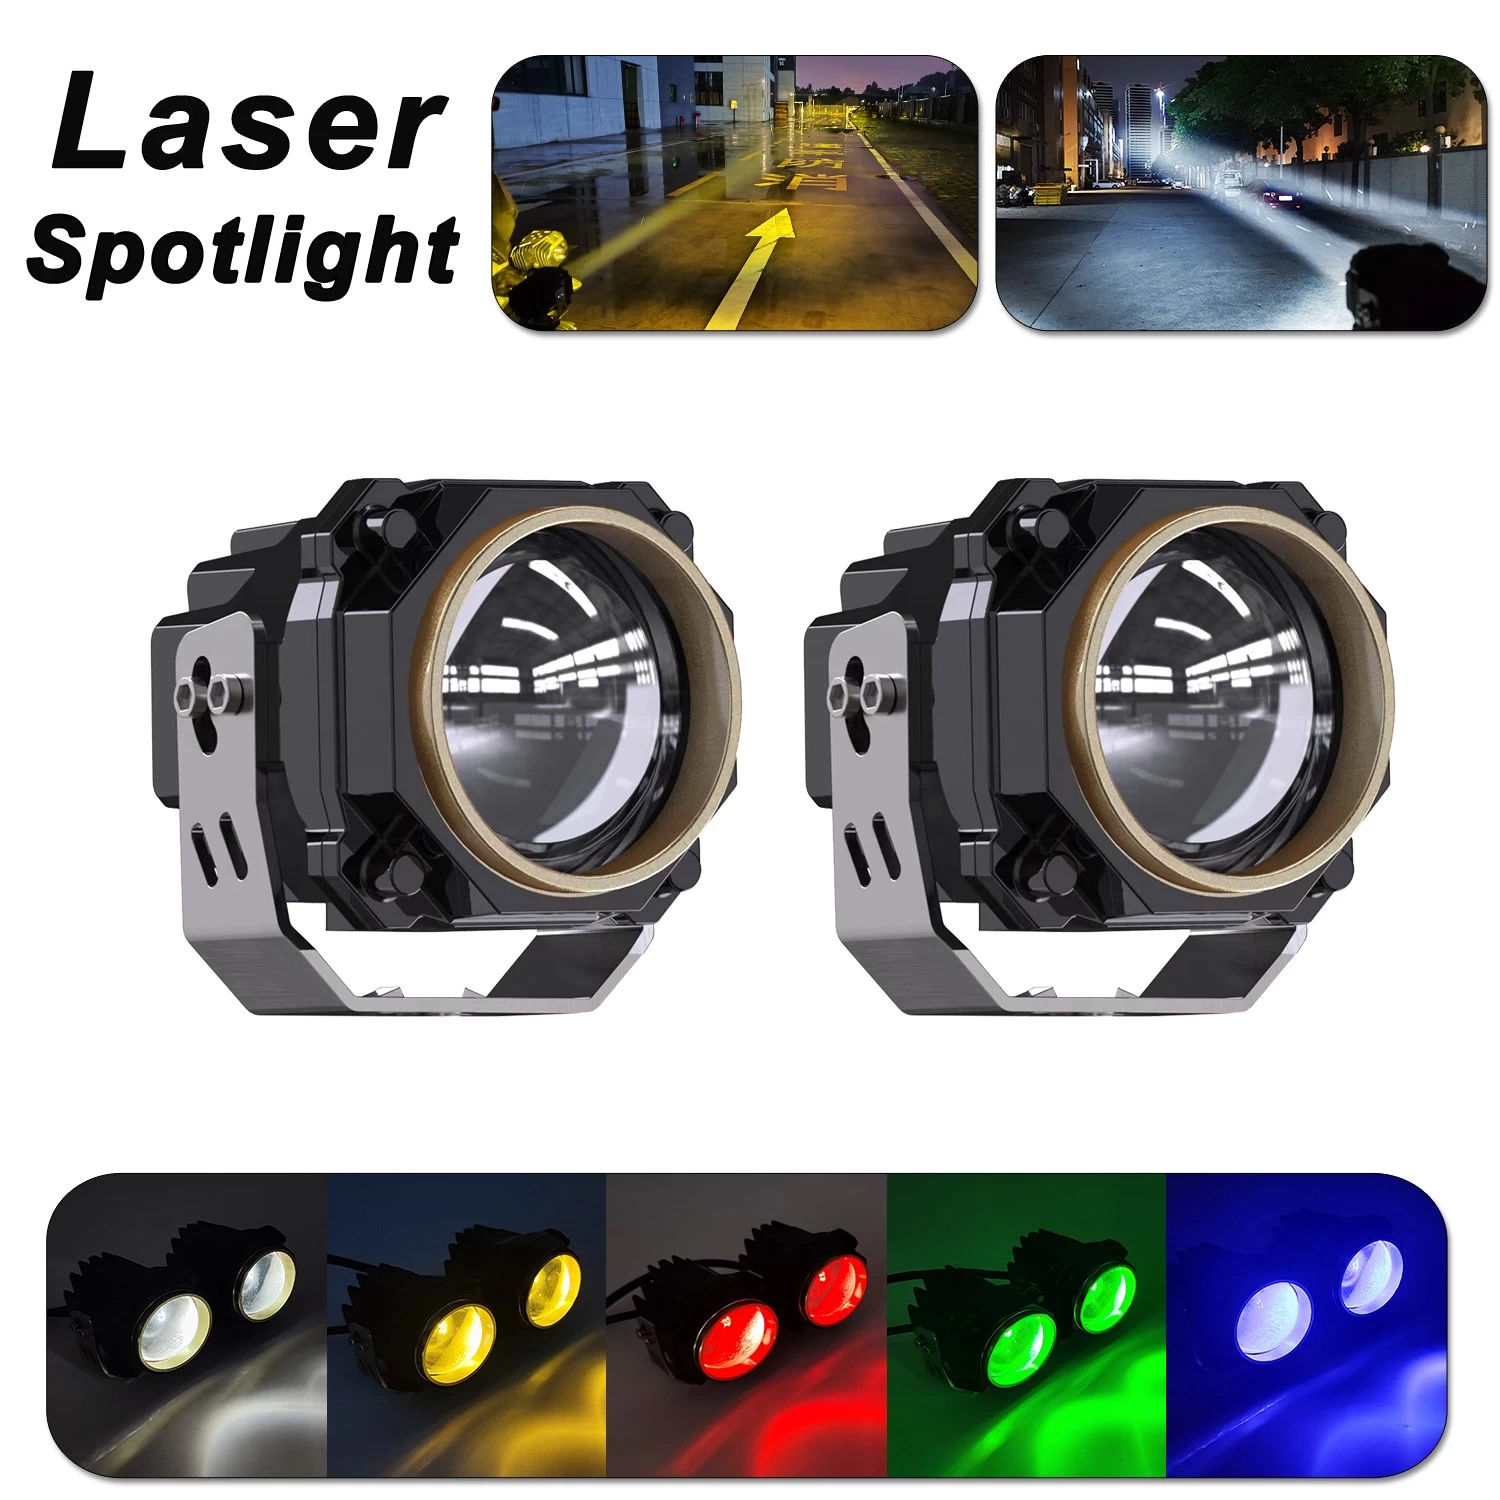 Motorcycle Laser Spotlight Fog Lamp Auxiliary Lights White Yellow Red Green Blue Motorcycle Spot Driving Fog Lights 60W 7800lm 2 pack